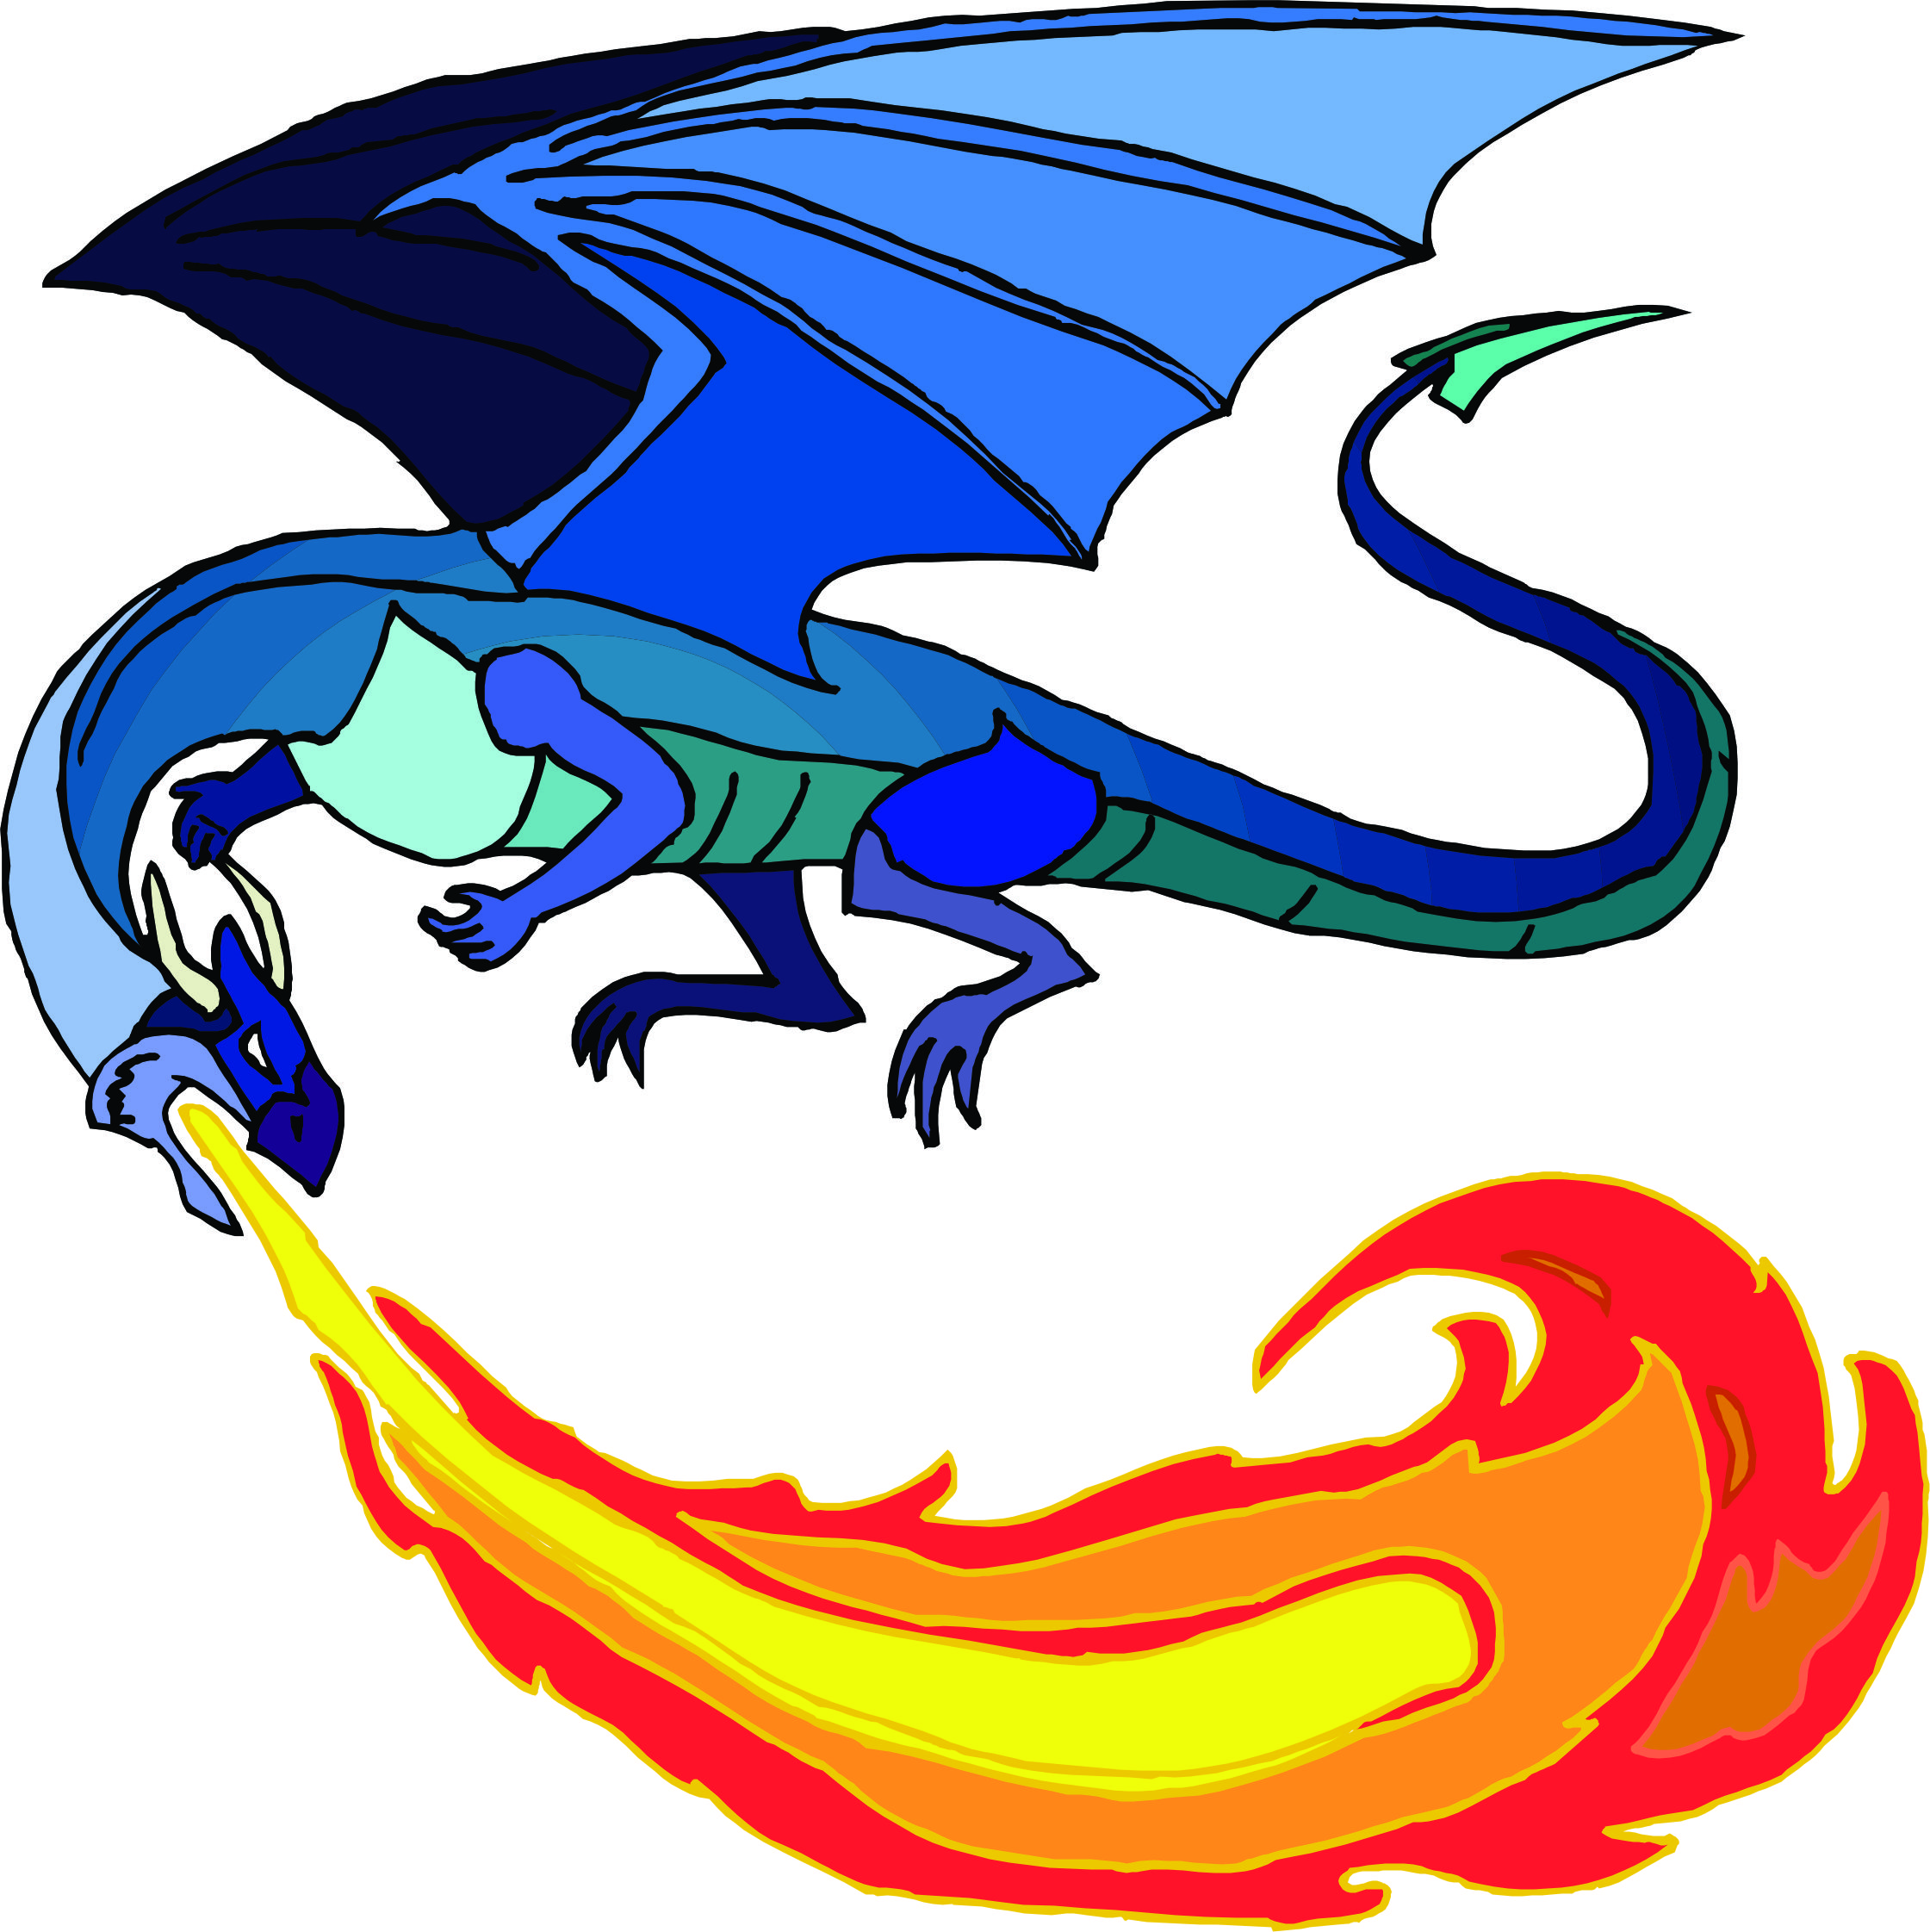 Dragon Breathing Fire Clipart   Clipart Panda   Free Clipart Images